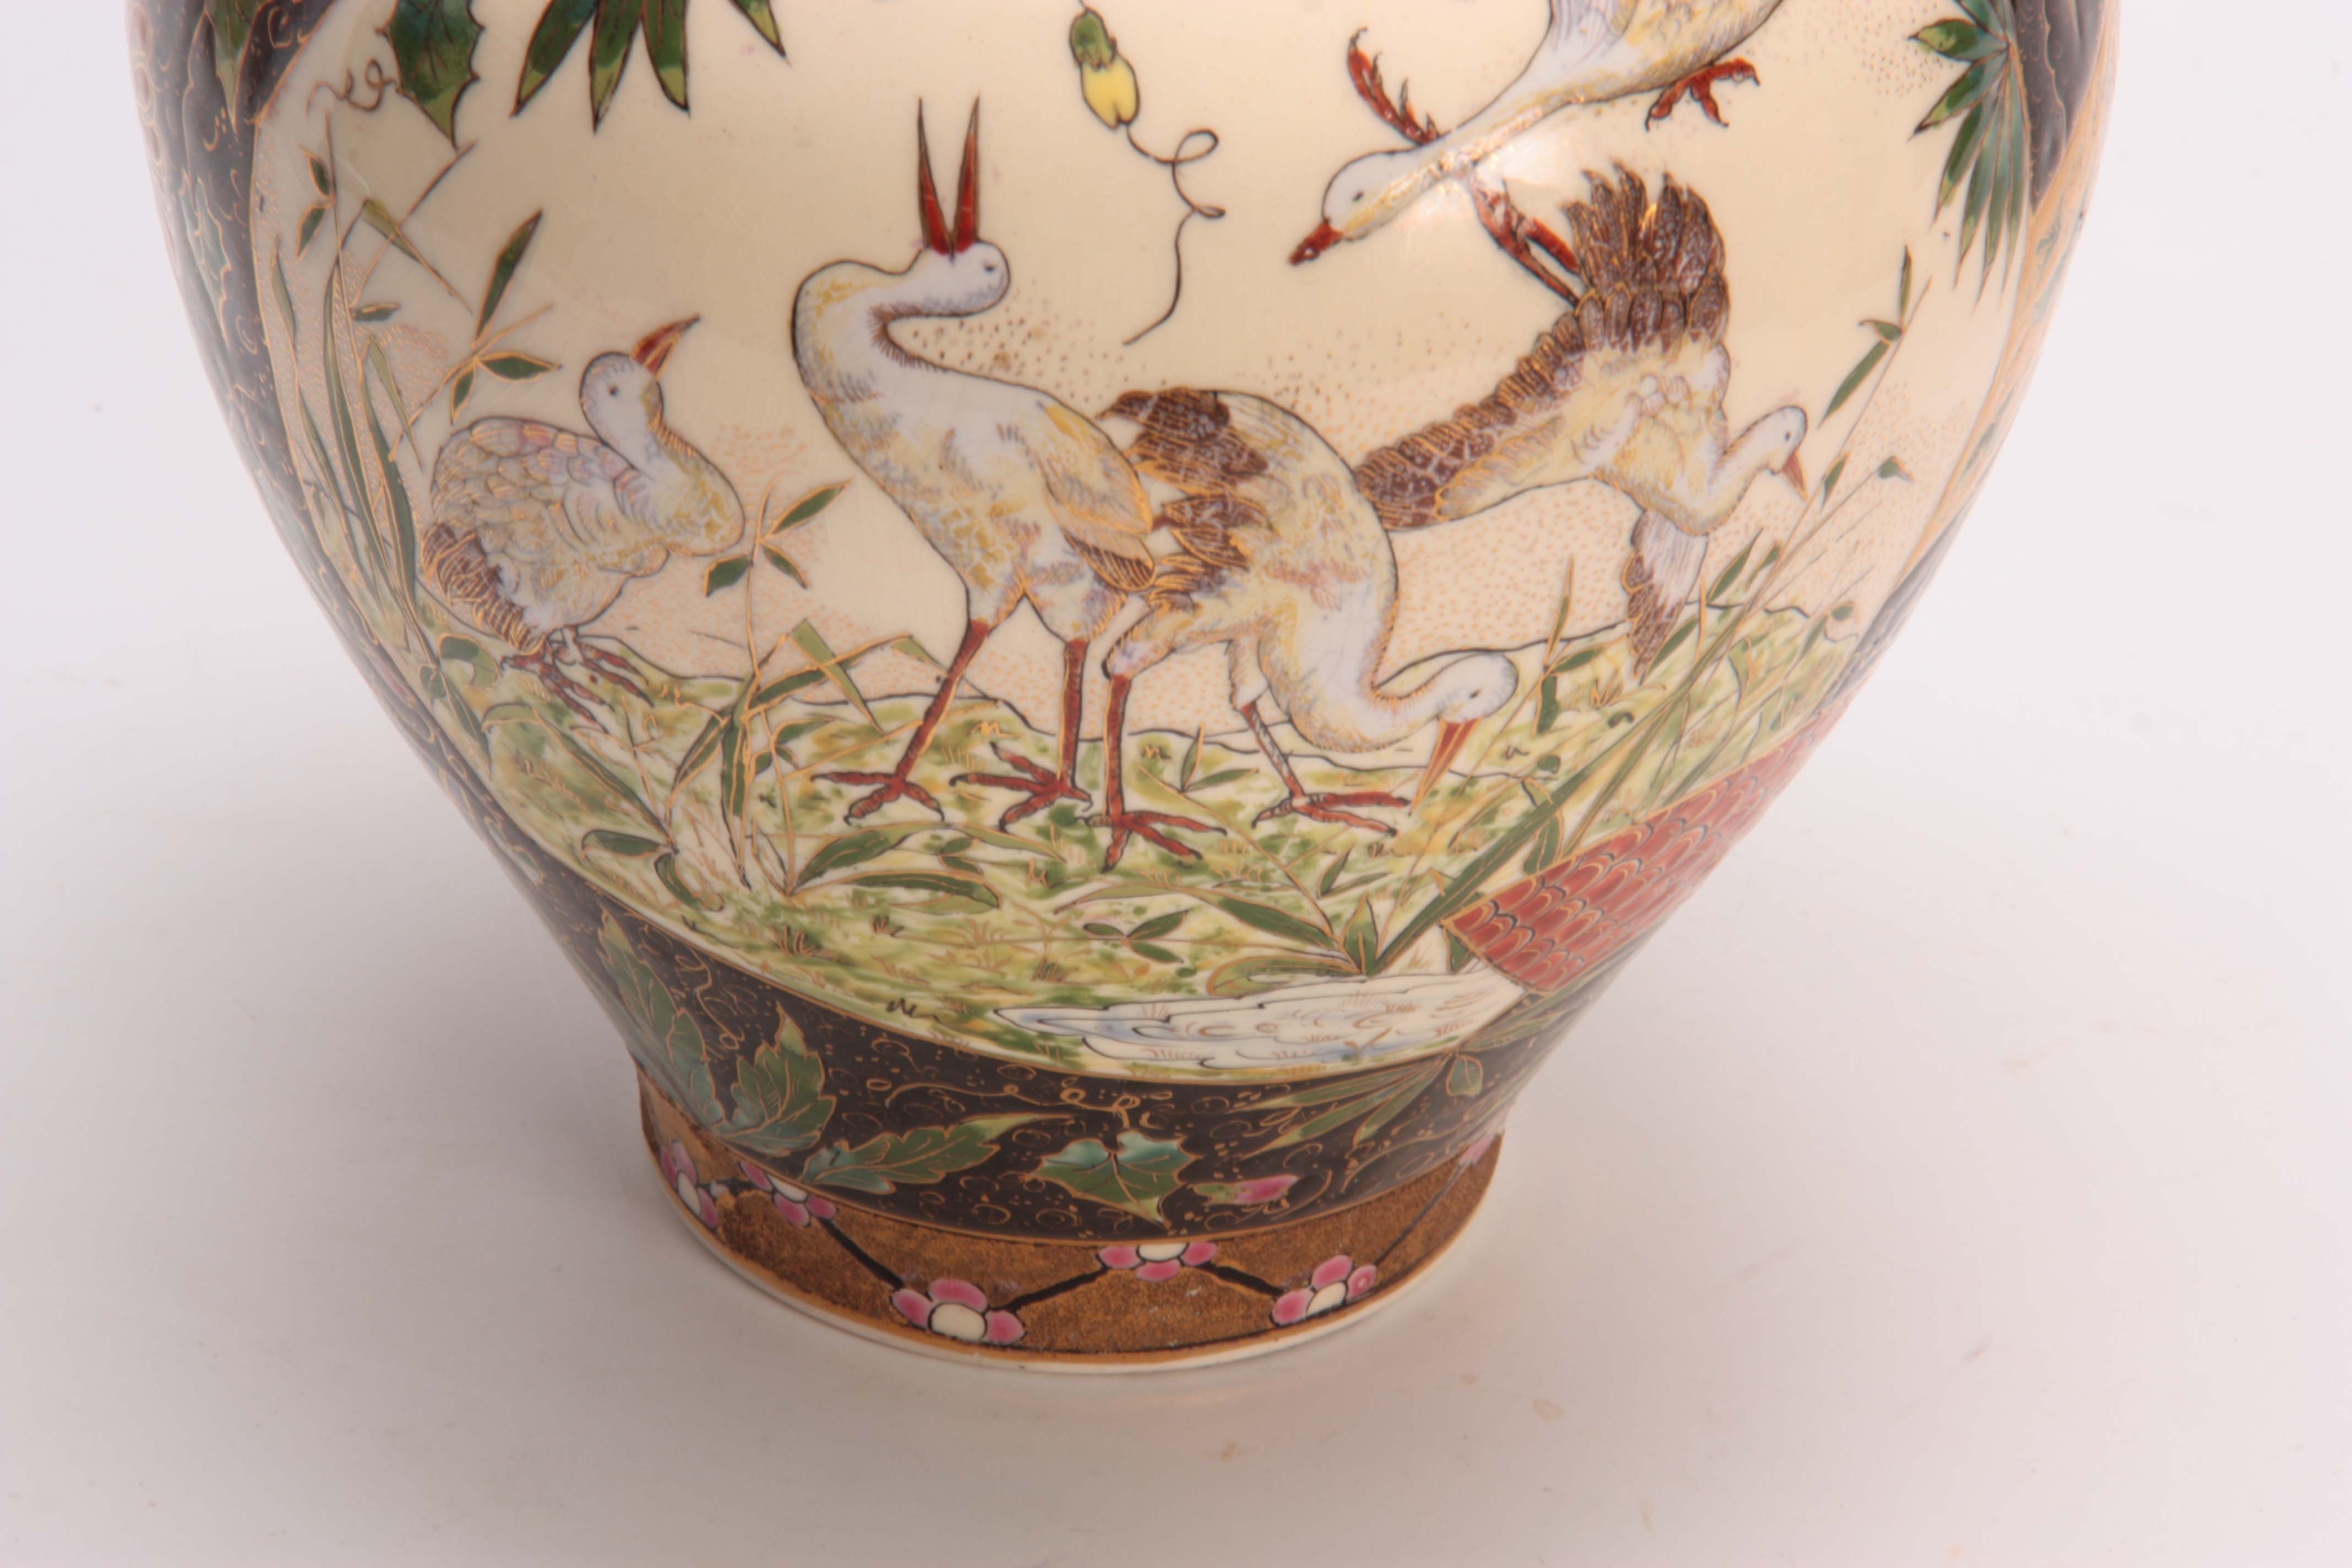 AN EARLY 20TH CENTURY HUNGARIAN FISCHER BUDAPEST WATER JUG decorated with birds and floral work - Image 3 of 5